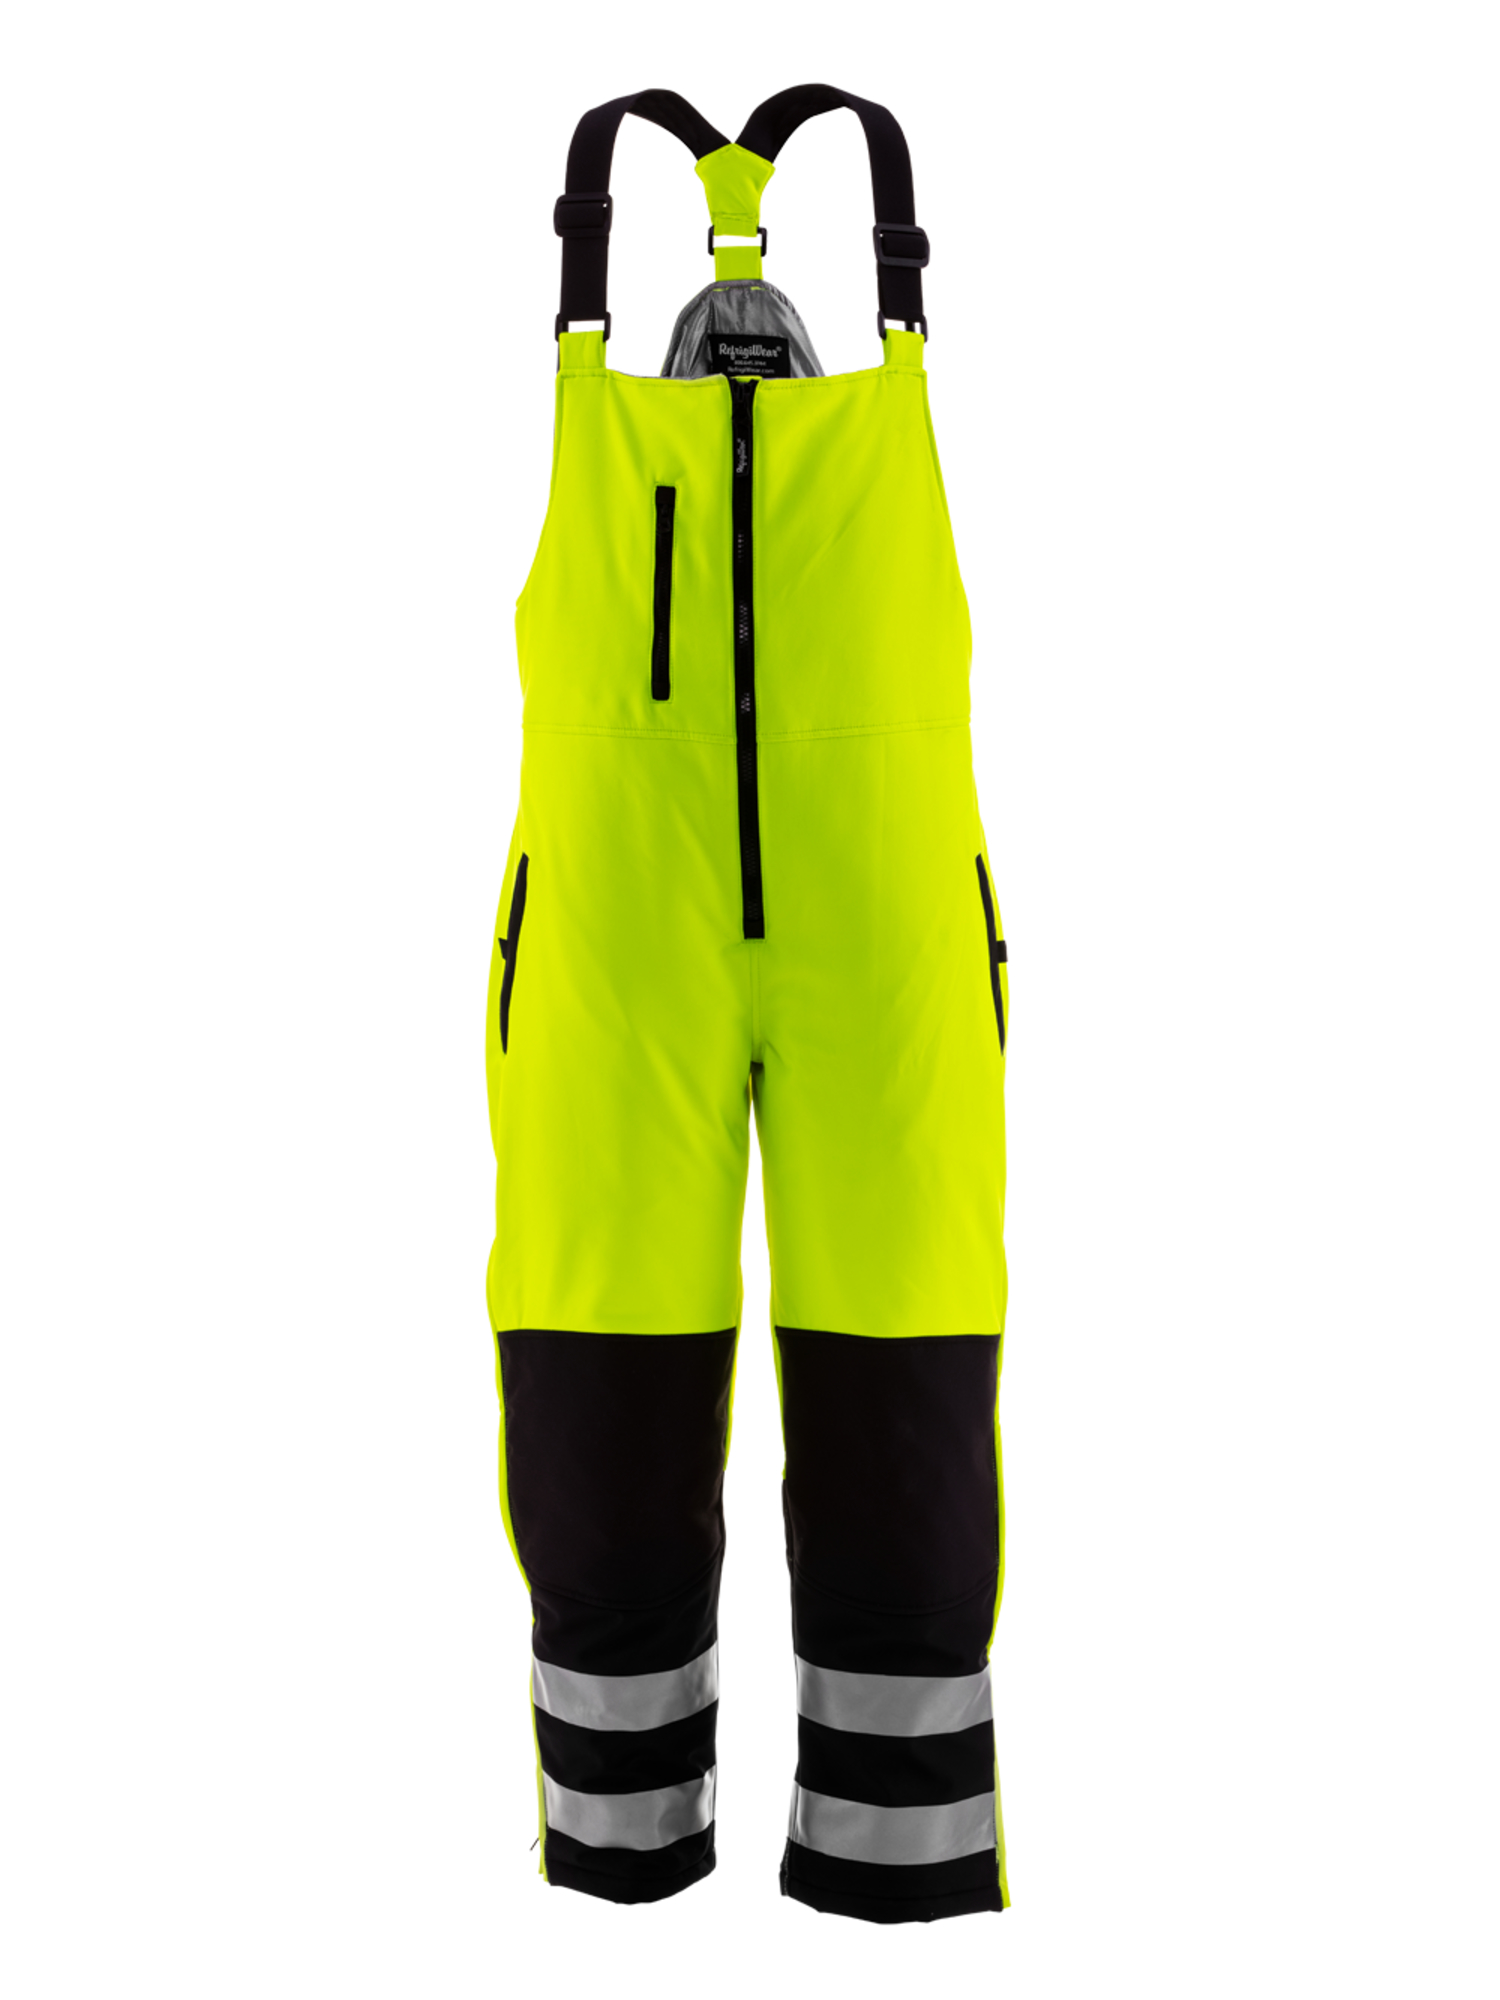 RefrigiWear HiVis Insulated Softshell Bib Overalls | Lightweight | Lime/Black | Fit: Big & Tall | 100% Polyester | S